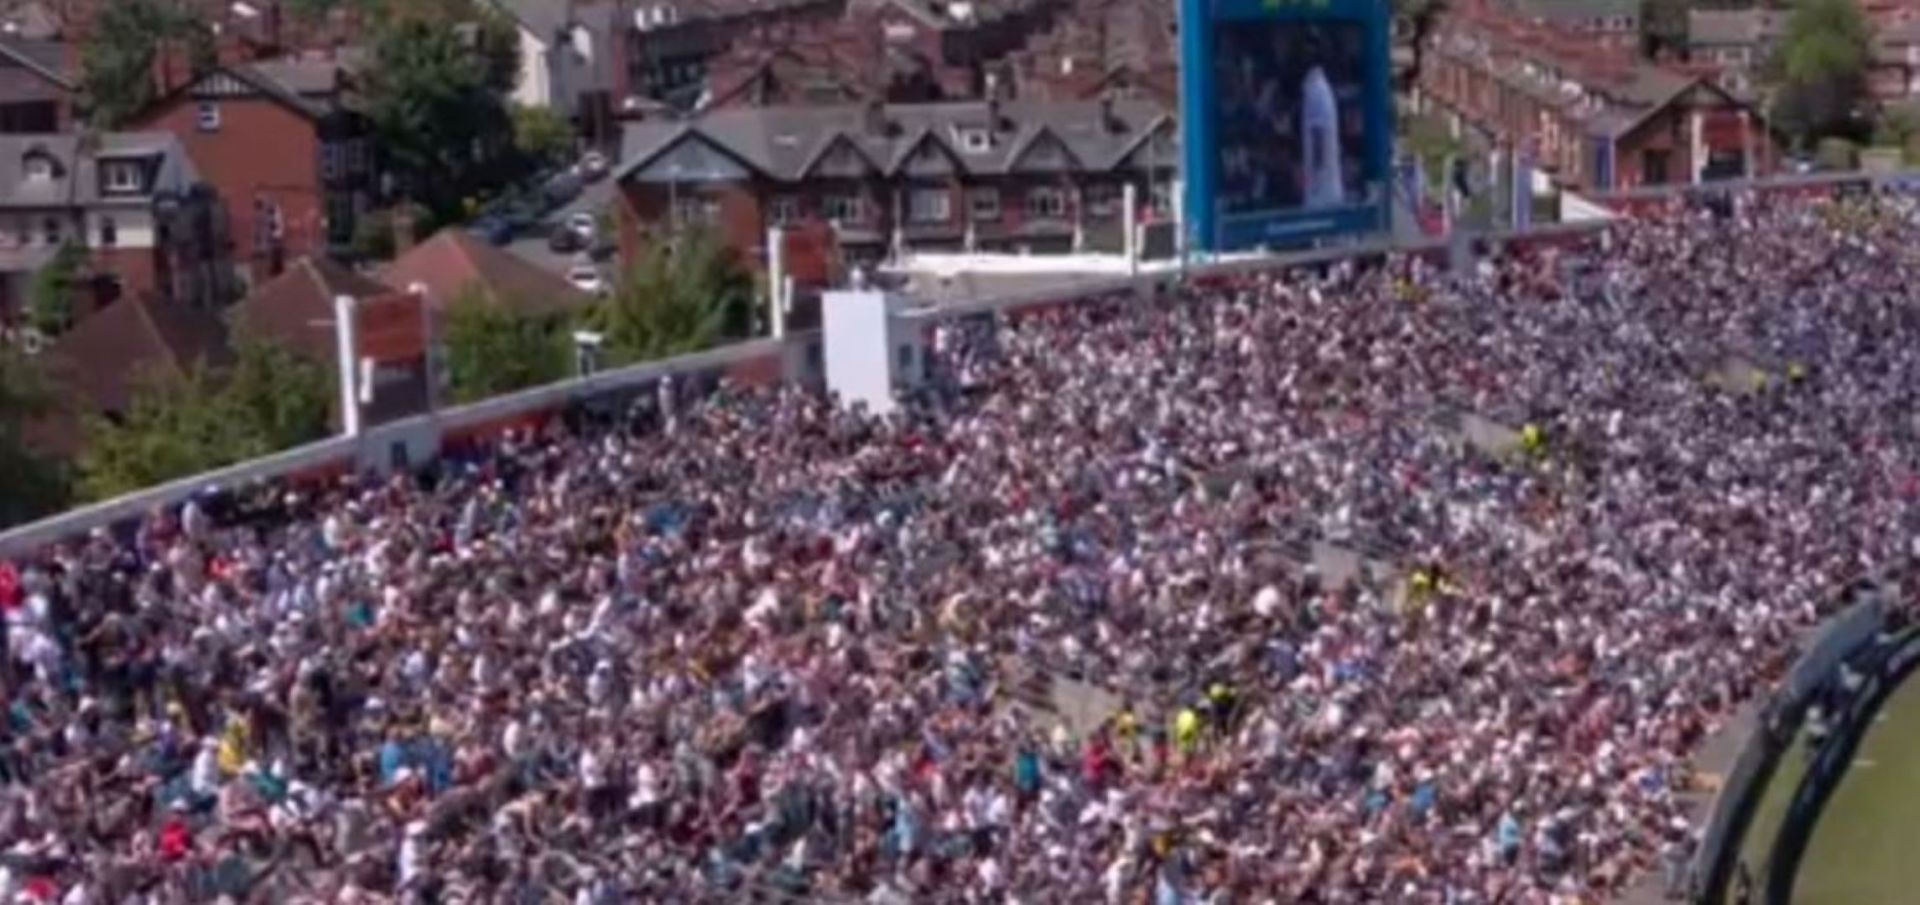 The Headingley crowd created a fantastic atmosphere throughout the third Test.